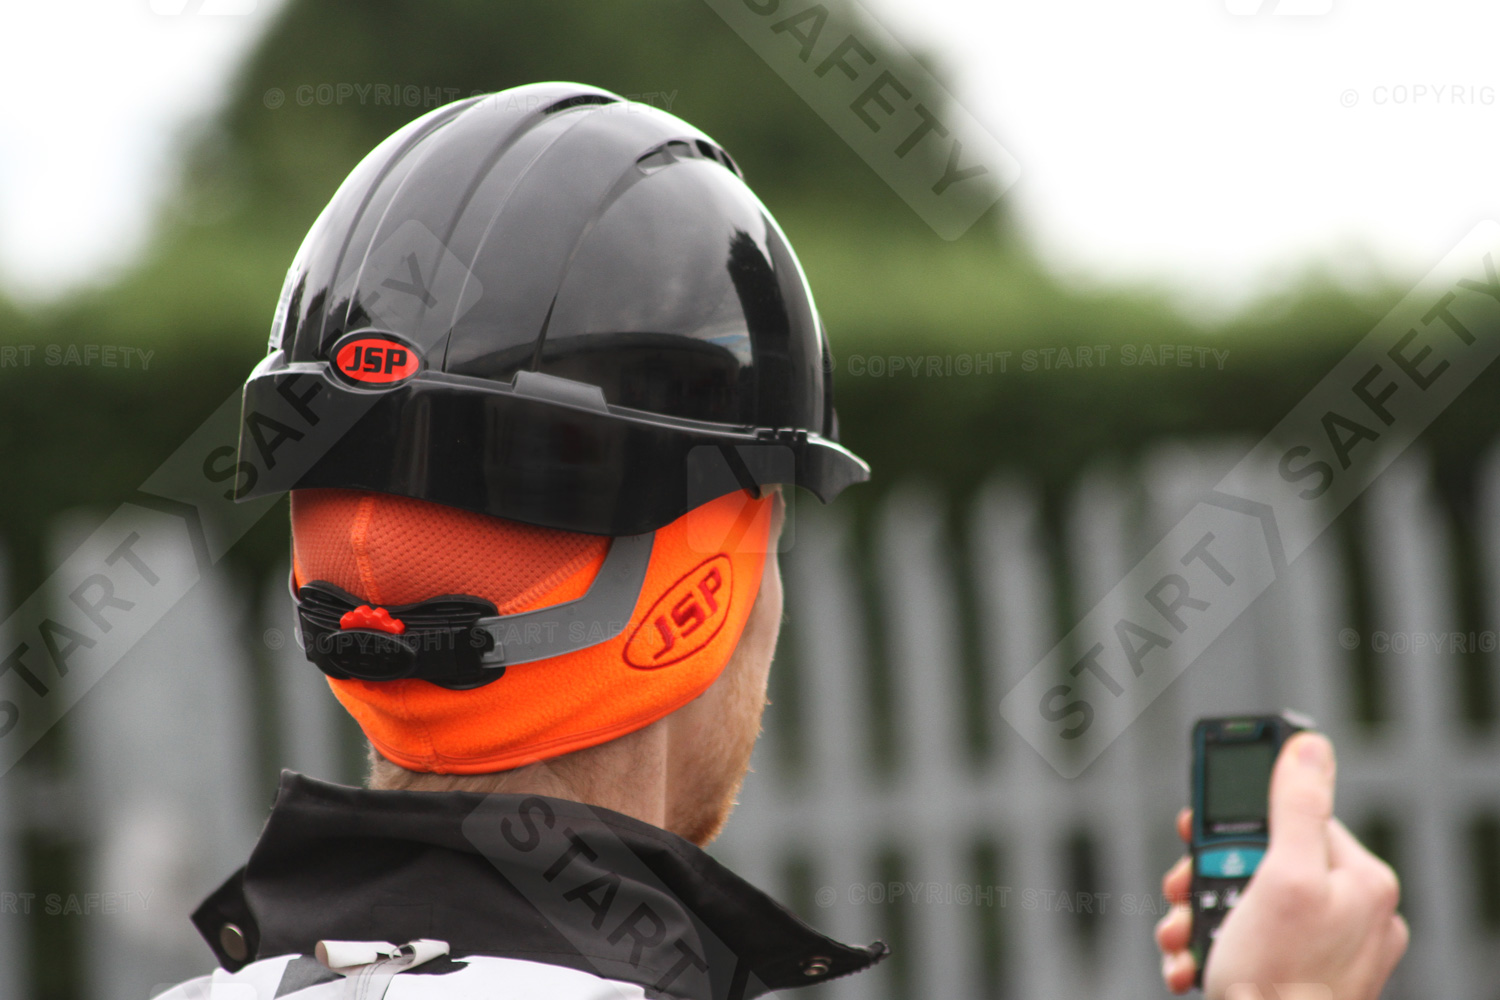 Manager Wearing A Black Hard Hat With A Thermal Liner